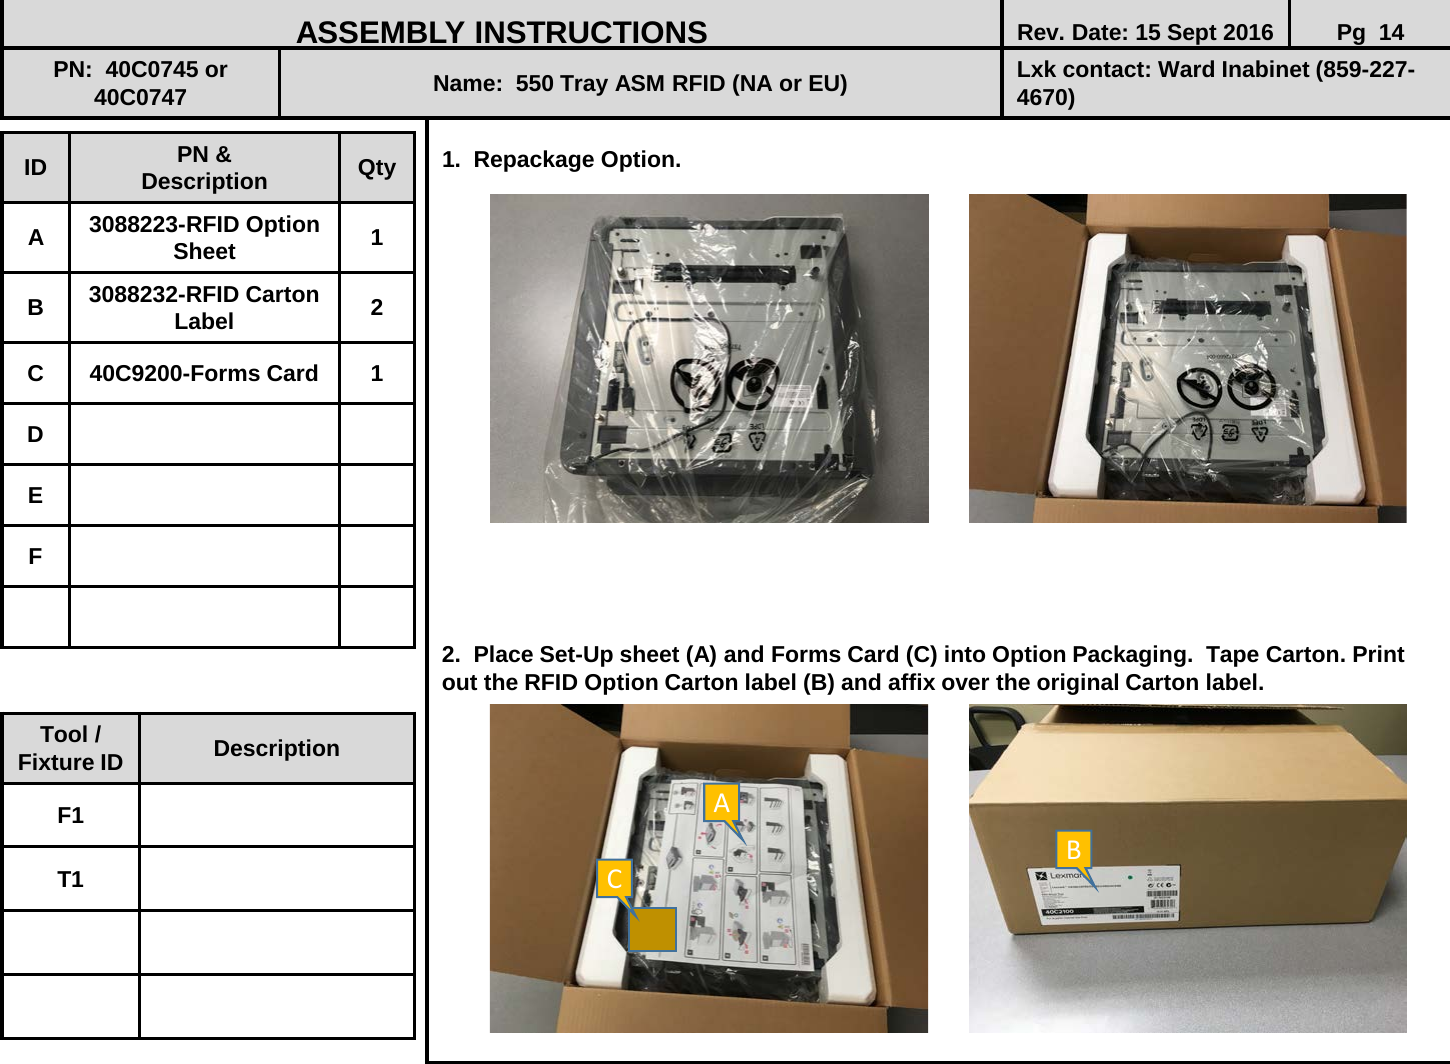  1.  Repackage Option.                    2.  Place Set-Up sheet (A) and Forms Card (C) into Option Packaging.  Tape Carton. Print out the RFID Option Carton label (B) and affix over the original Carton label.               ID PN &amp; Description Qty A  3088223-RFID Option Sheet 1 B  3088232-RFID Carton Label 2 C  40C9200-Forms Card  1 D E F ASSEMBLY INSTRUCTIONS Rev. Date: 15 Sept 2016 Pg  14 PN:  40C0745 or 40C0747 Name:  550 Tray ASM RFID (NA or EU) Lxk contact: Ward Inabinet (859-227-4670) Tool / Fixture ID Description F1 T1 A B C 